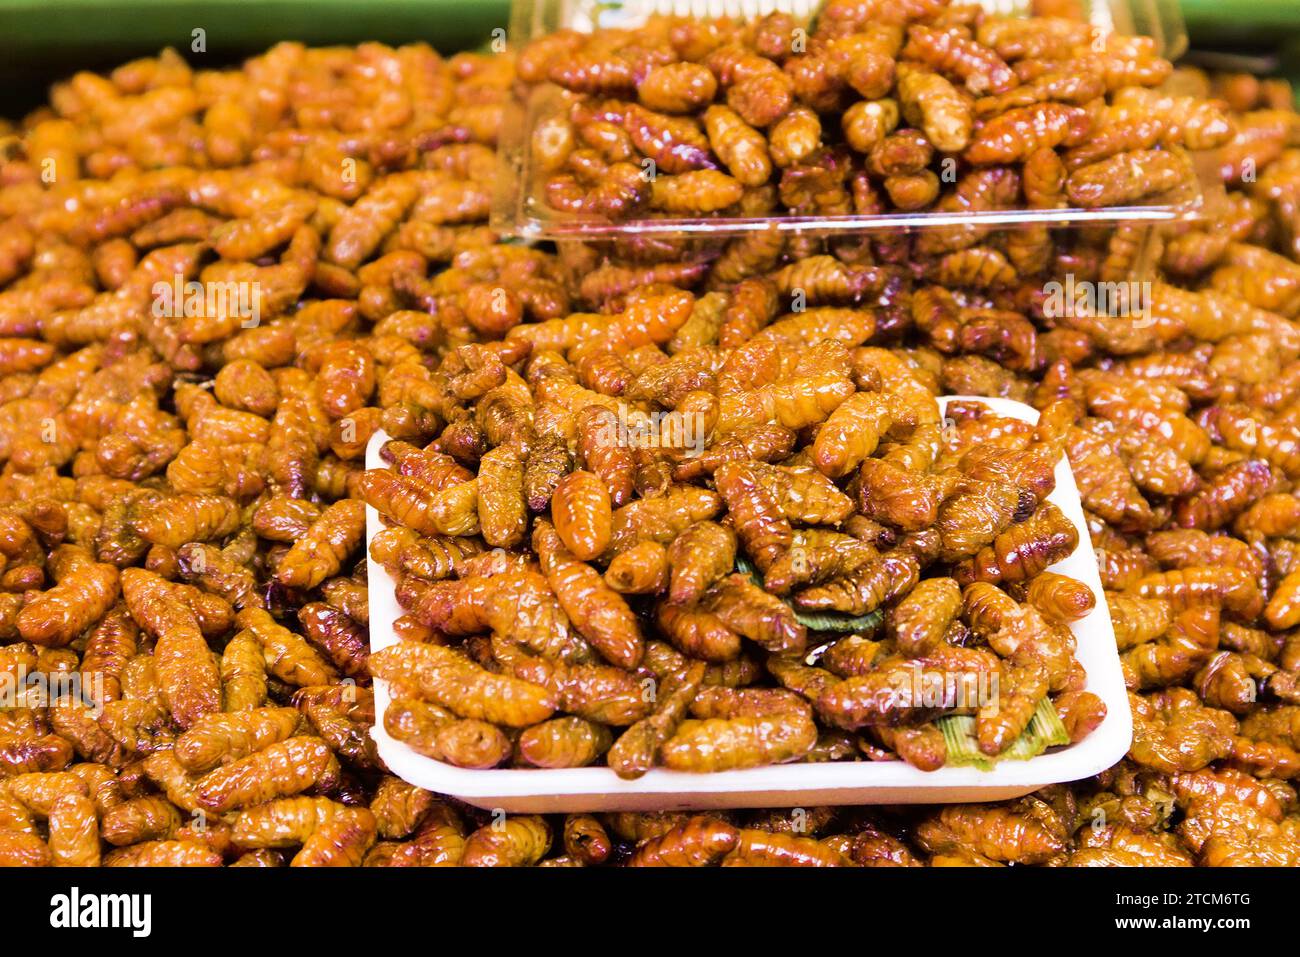 Exotic Asian food. Thai ancient cuisine. Fried insect larvae (mostly pruner, wood engraver) Stock Photo